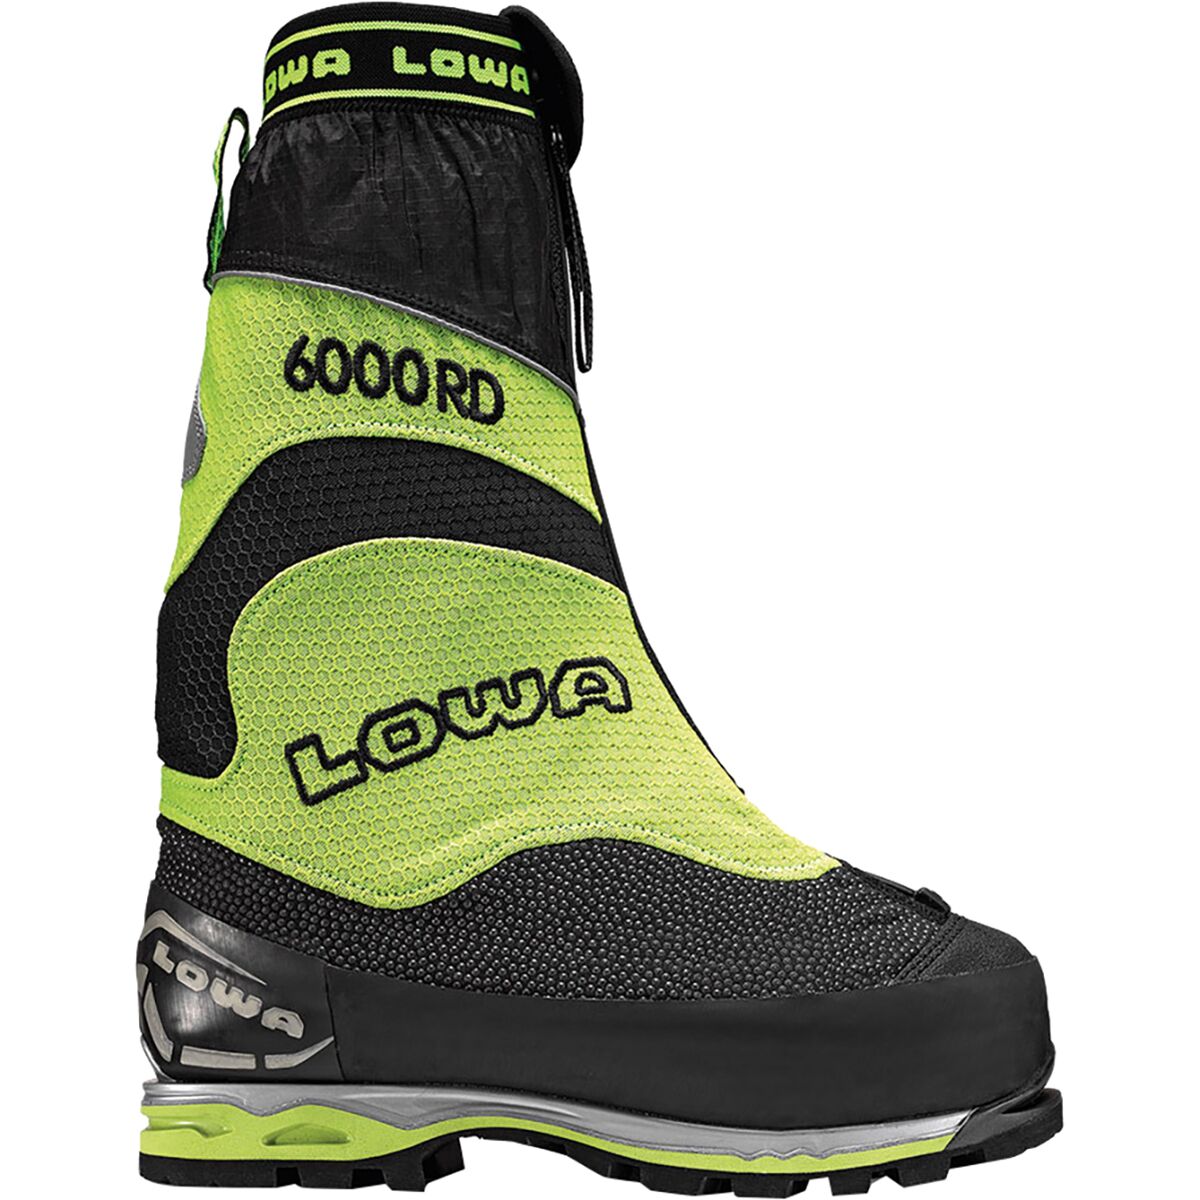 Lowa Expedition 6000 EVO RD Boot